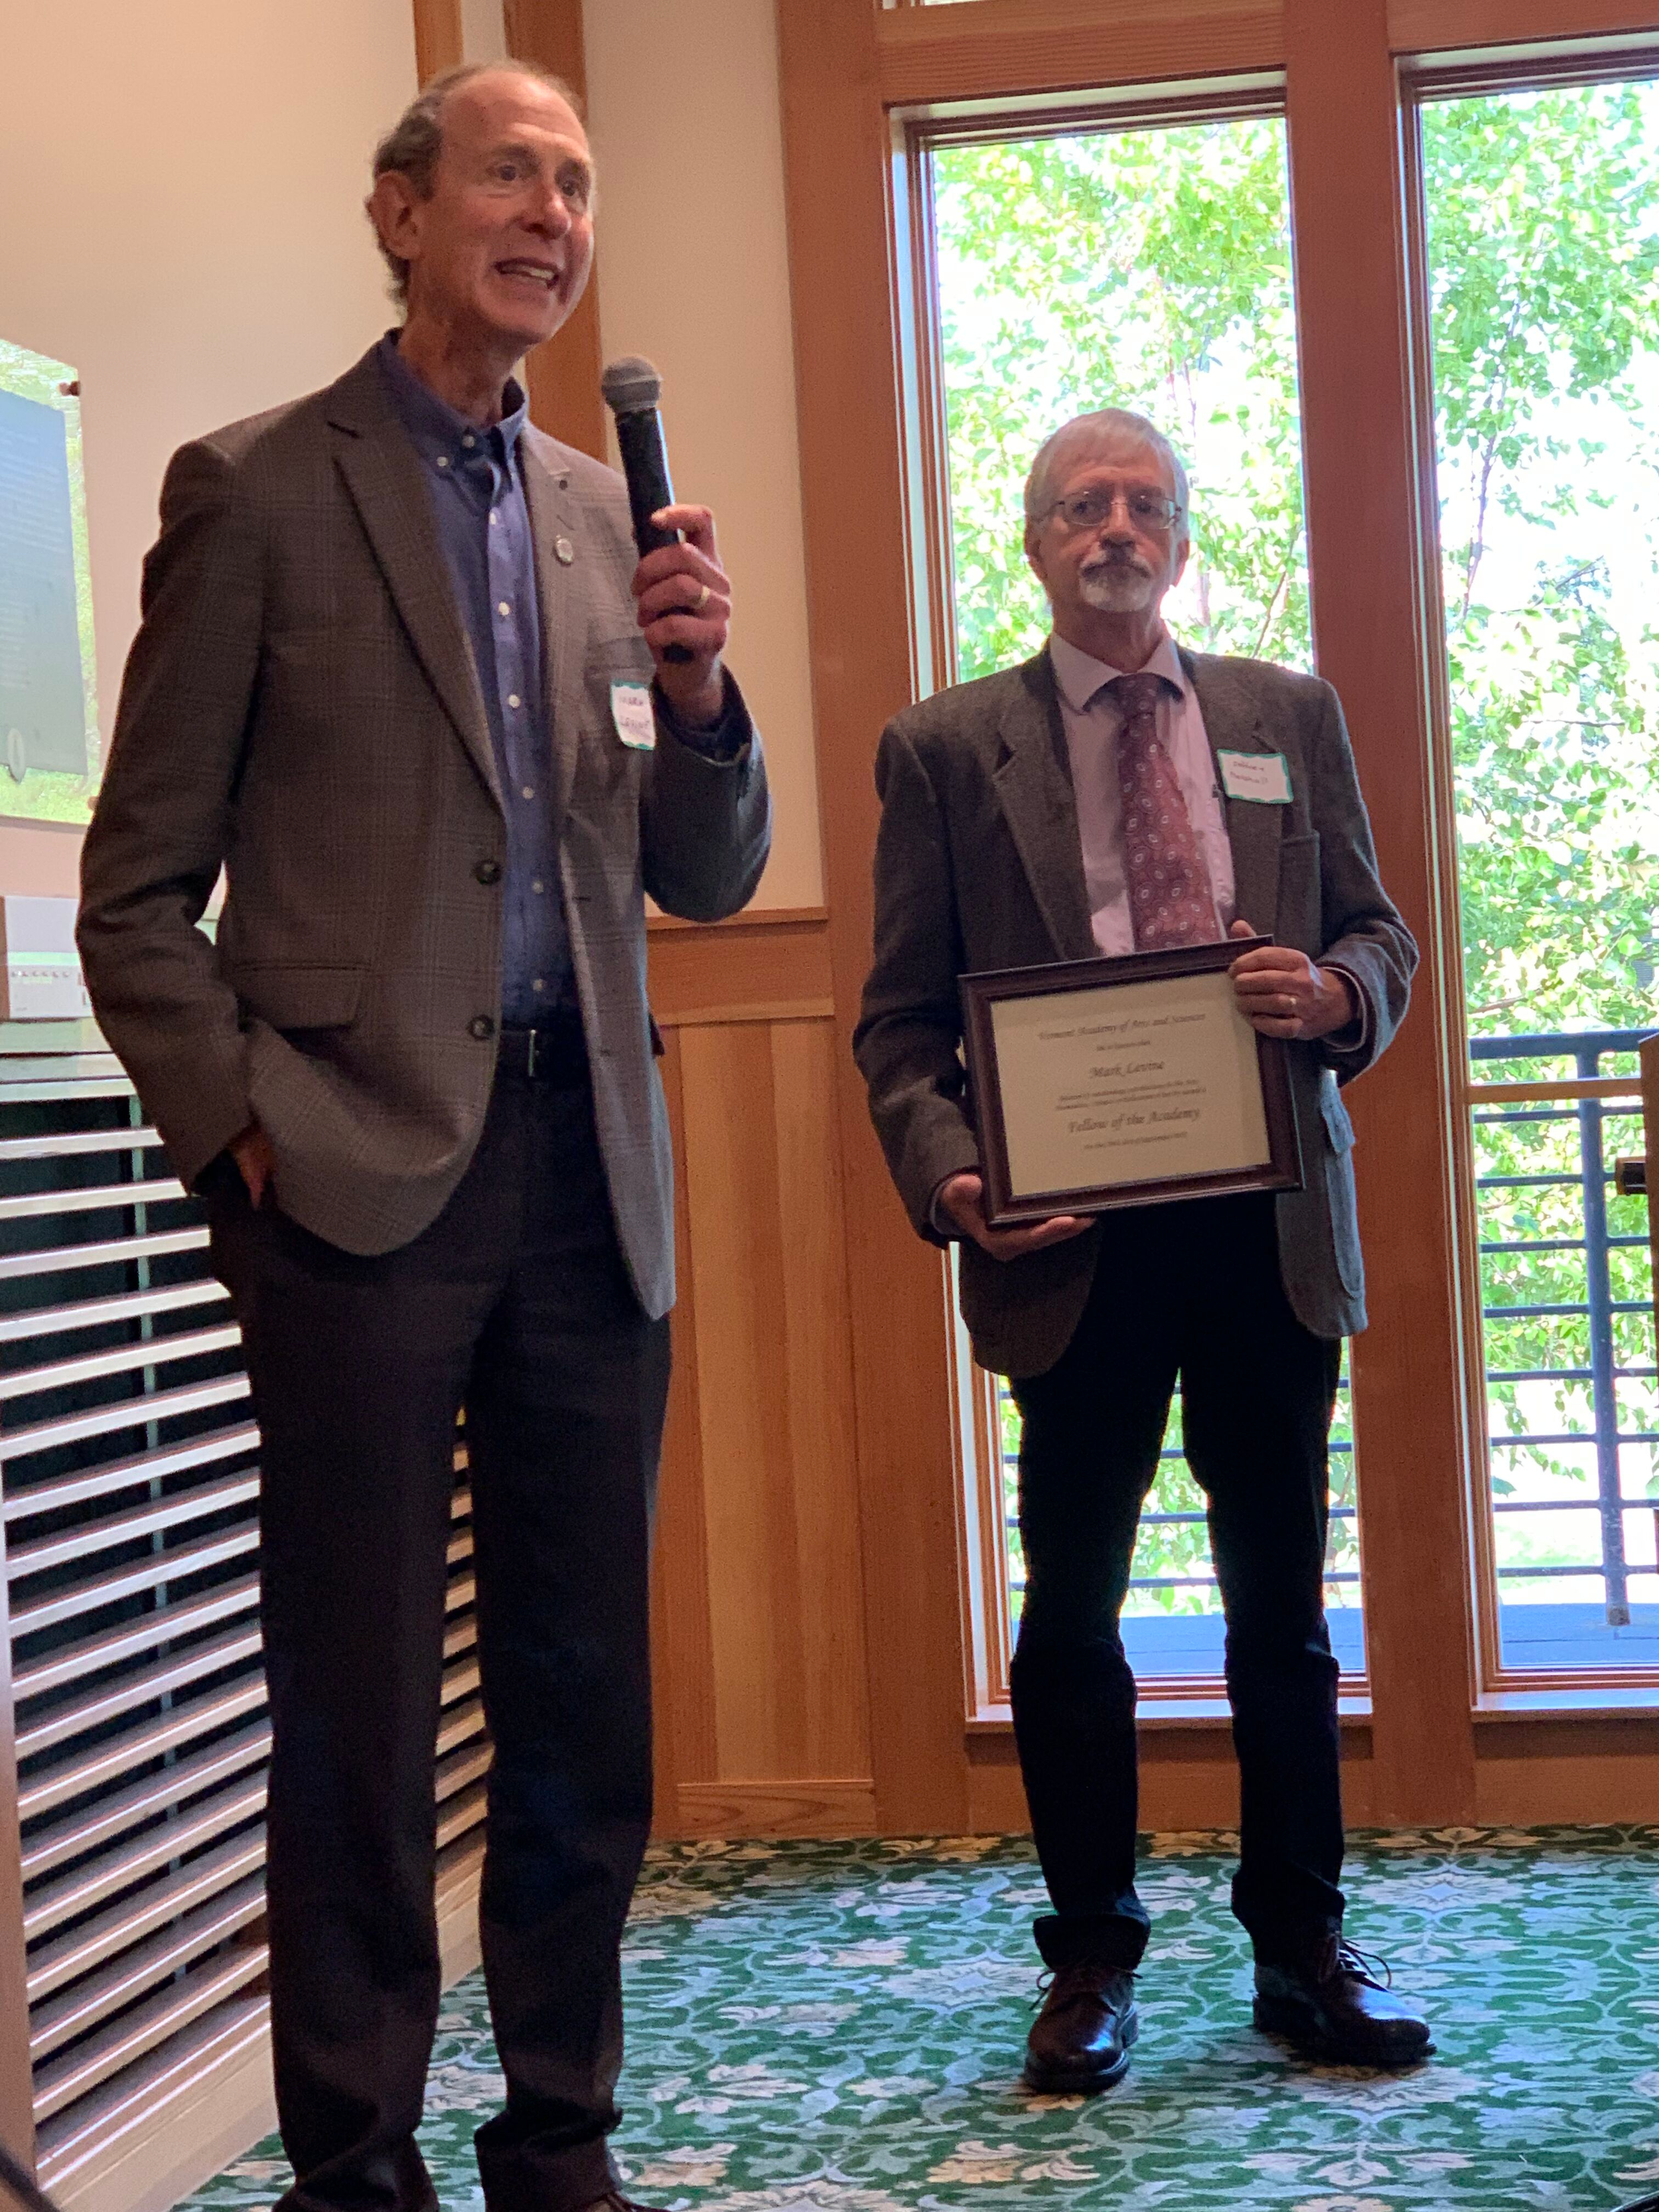 Vermont Commissioner of Health, Mark Levine, is honored as a Fellow with Jeff Marshall presenting